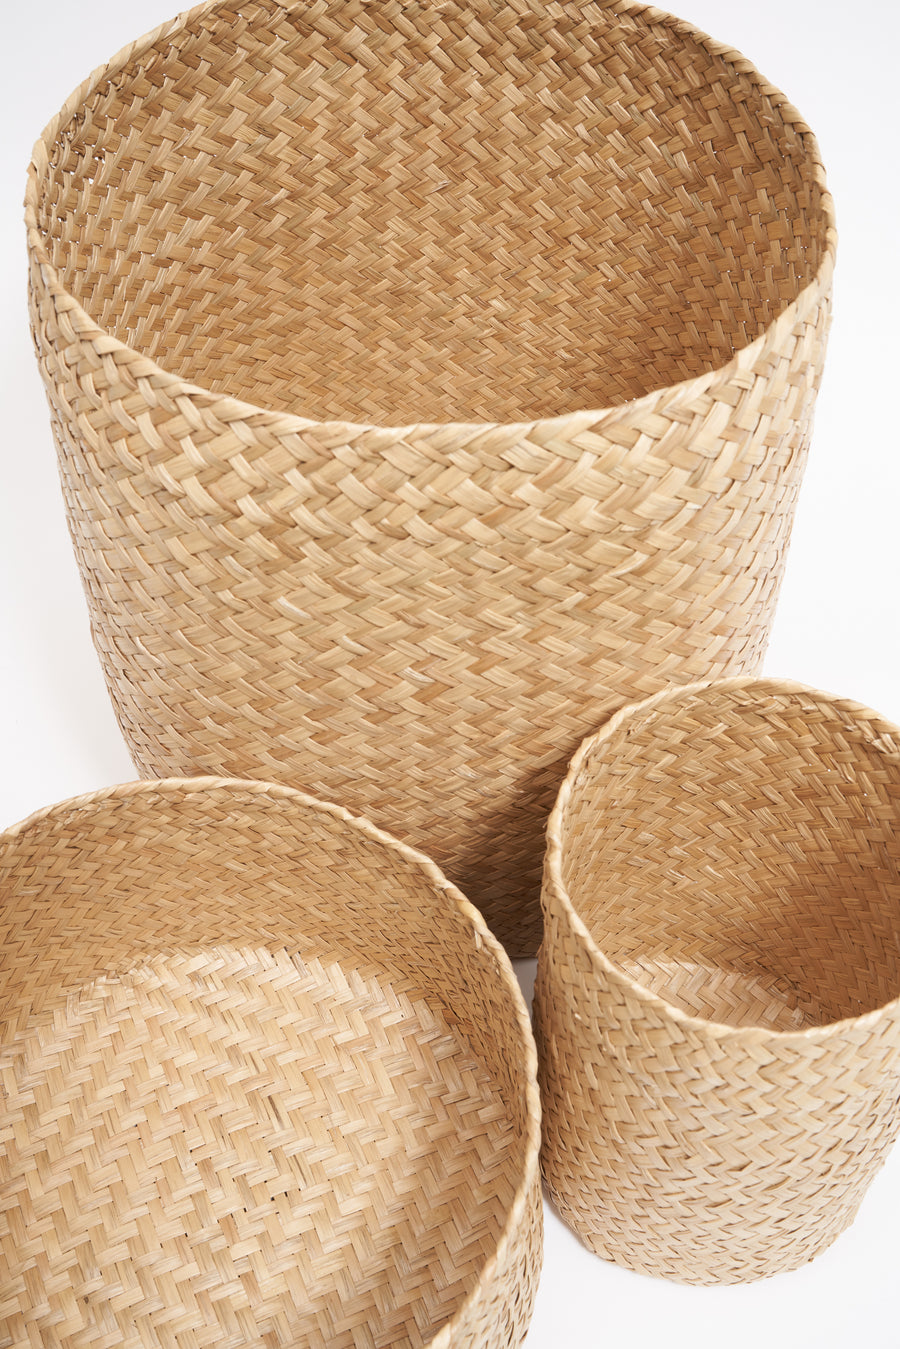 Round Seagrass Woven Storage Basket with Lid // Flat